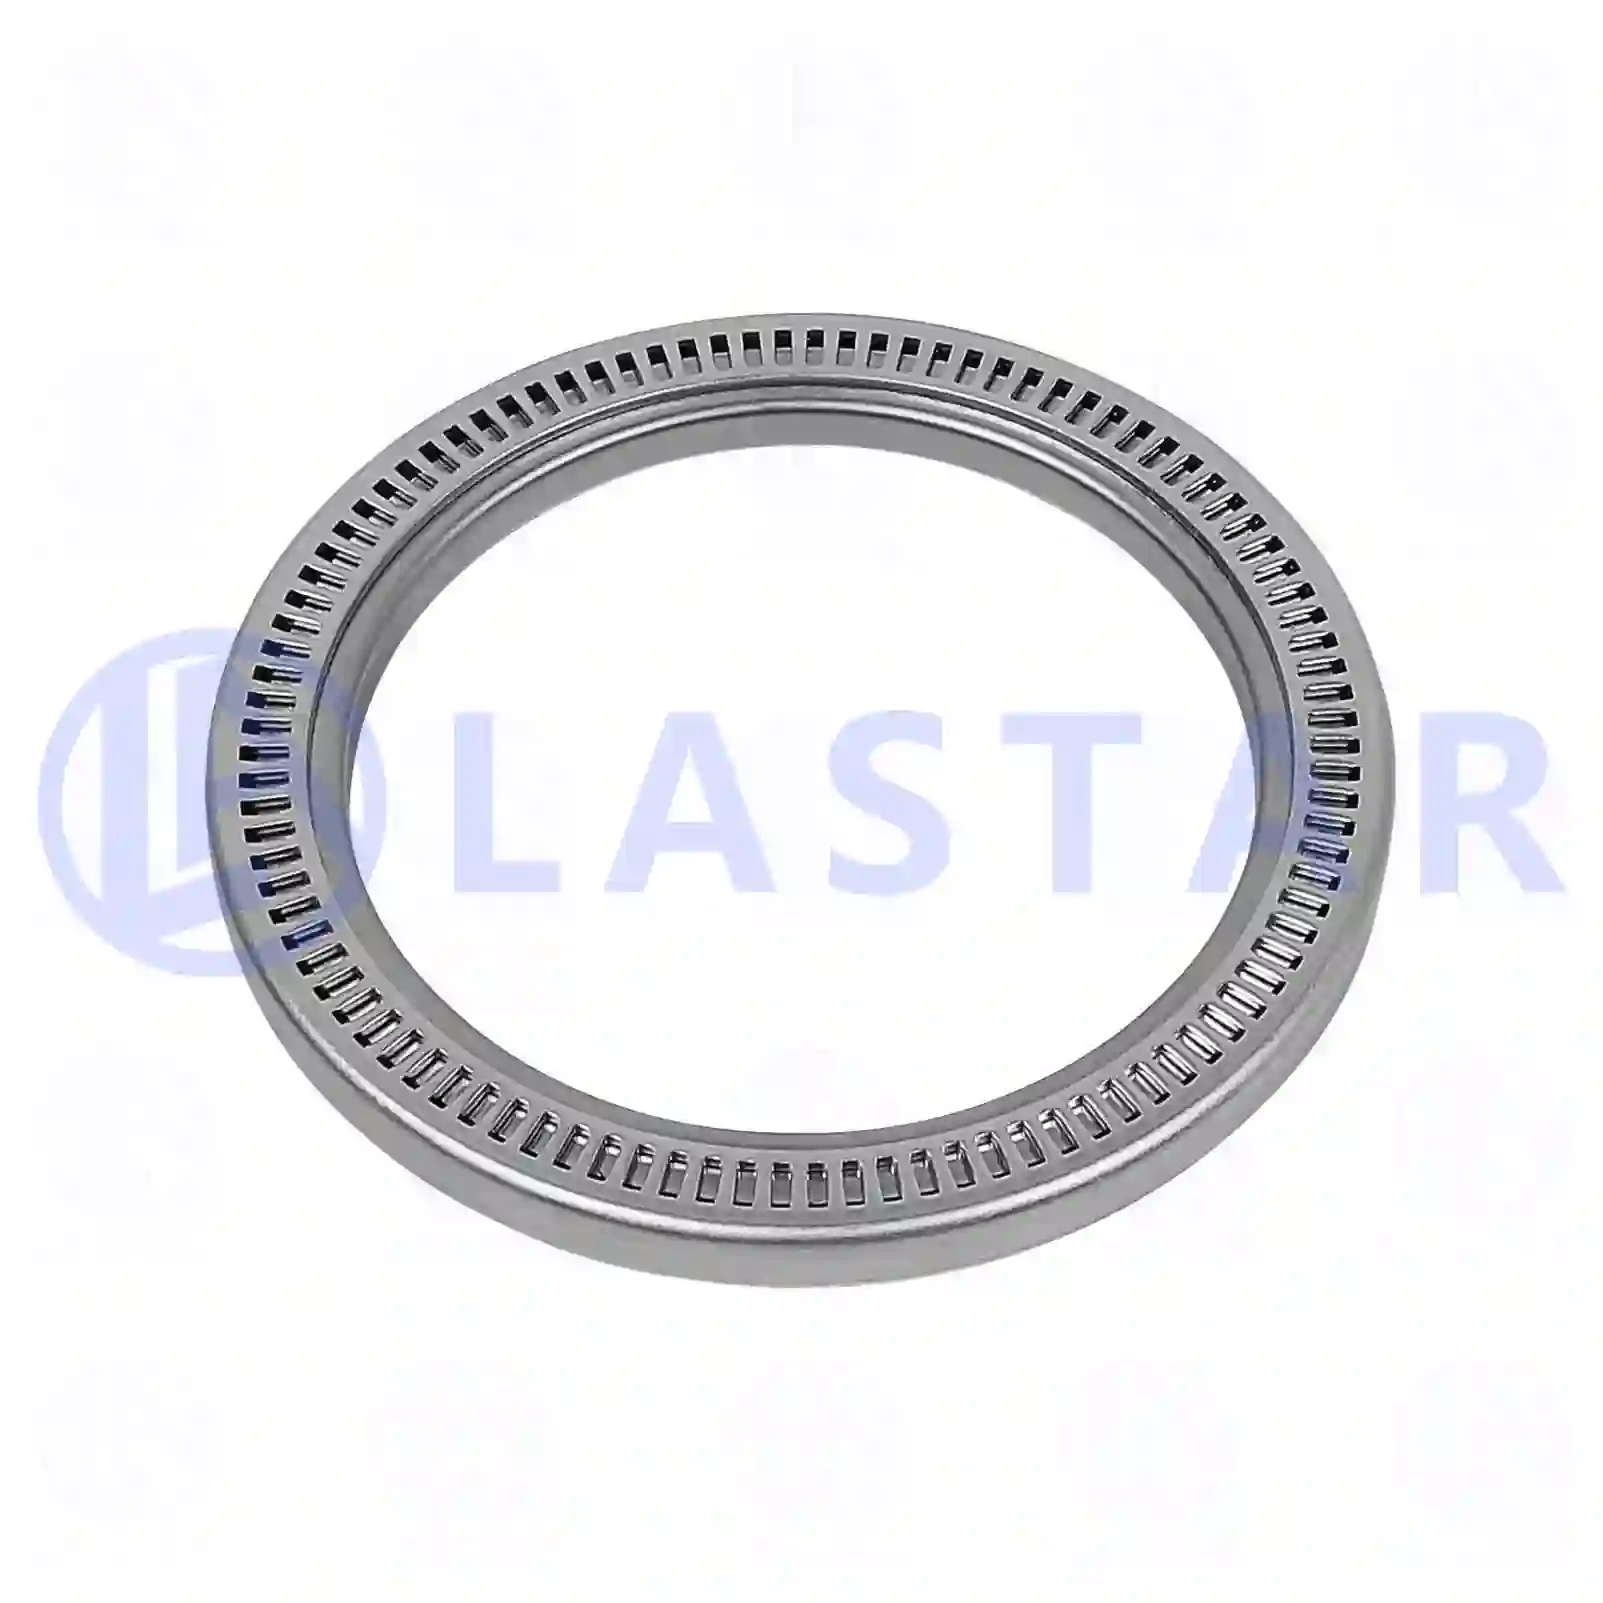 Hub Oil seal, with ABS ring, la no: 77726089 ,  oem no:500023256, 36965030017, 1850981, 2494732, ZG02823-0008, Lastar Spare Part | Truck Spare Parts, Auotomotive Spare Parts